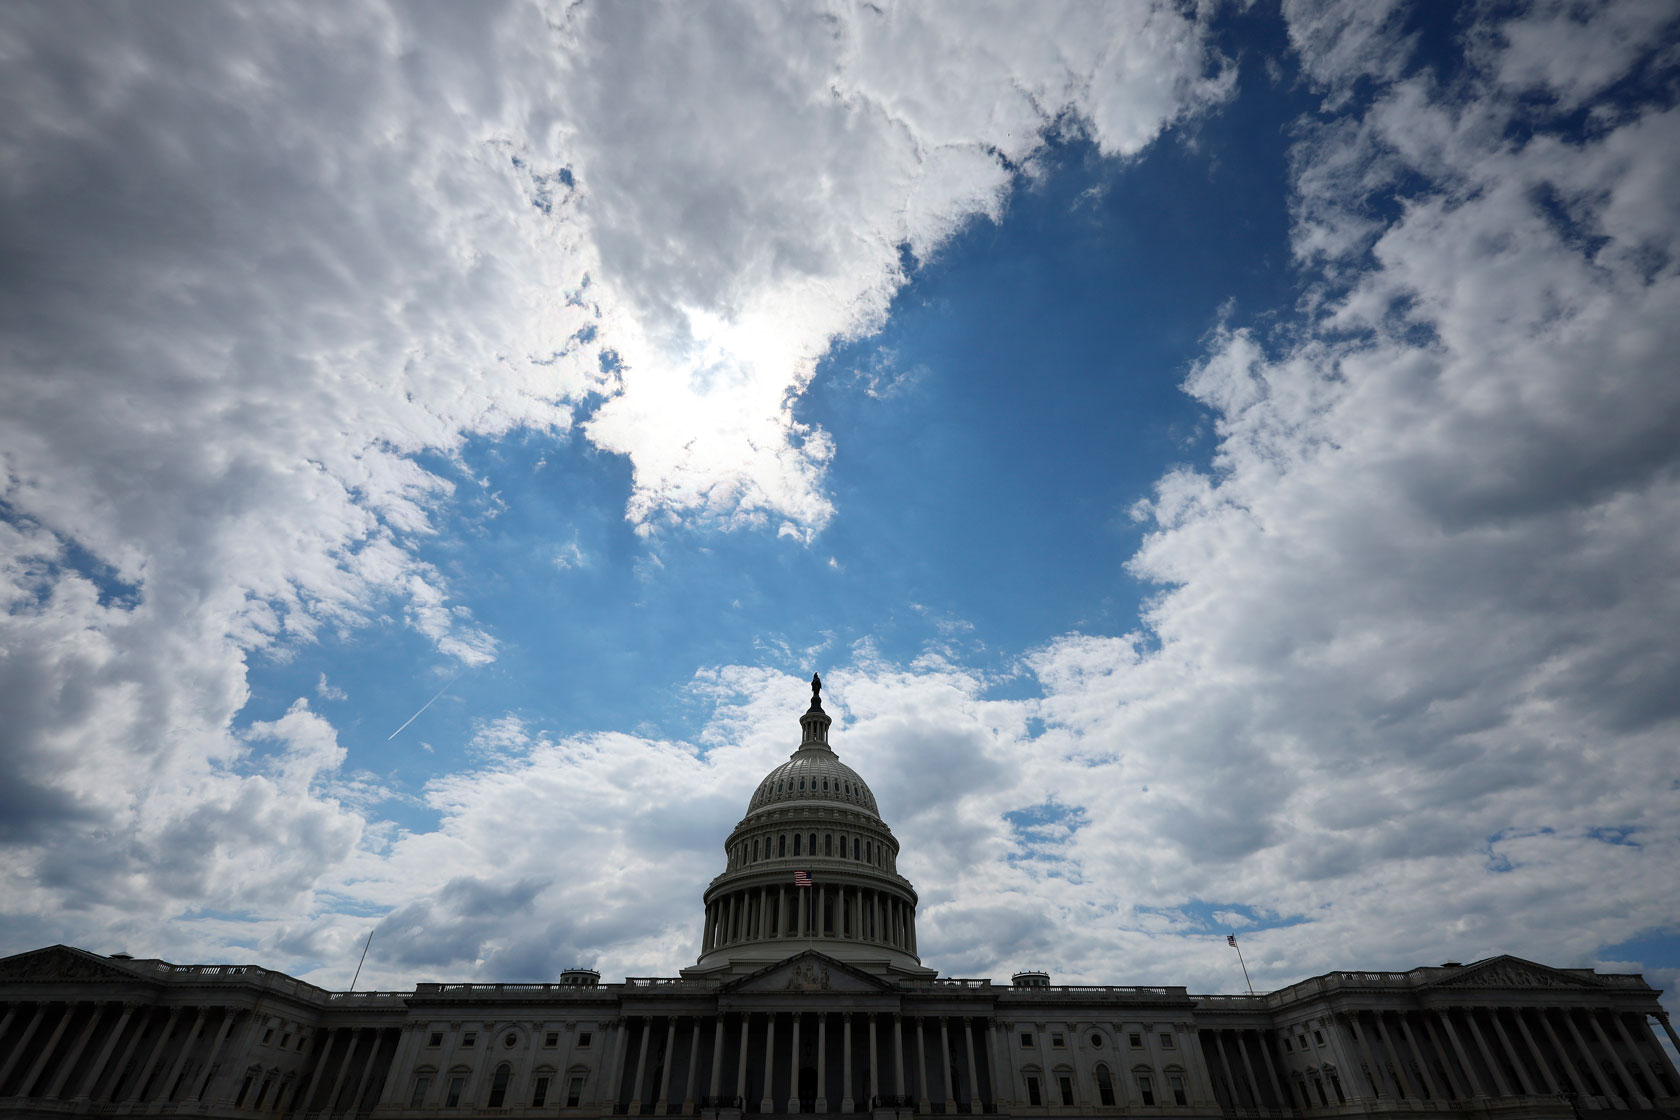 The U.S. Capitol building is seen in Washington against a partl cloudy sky.